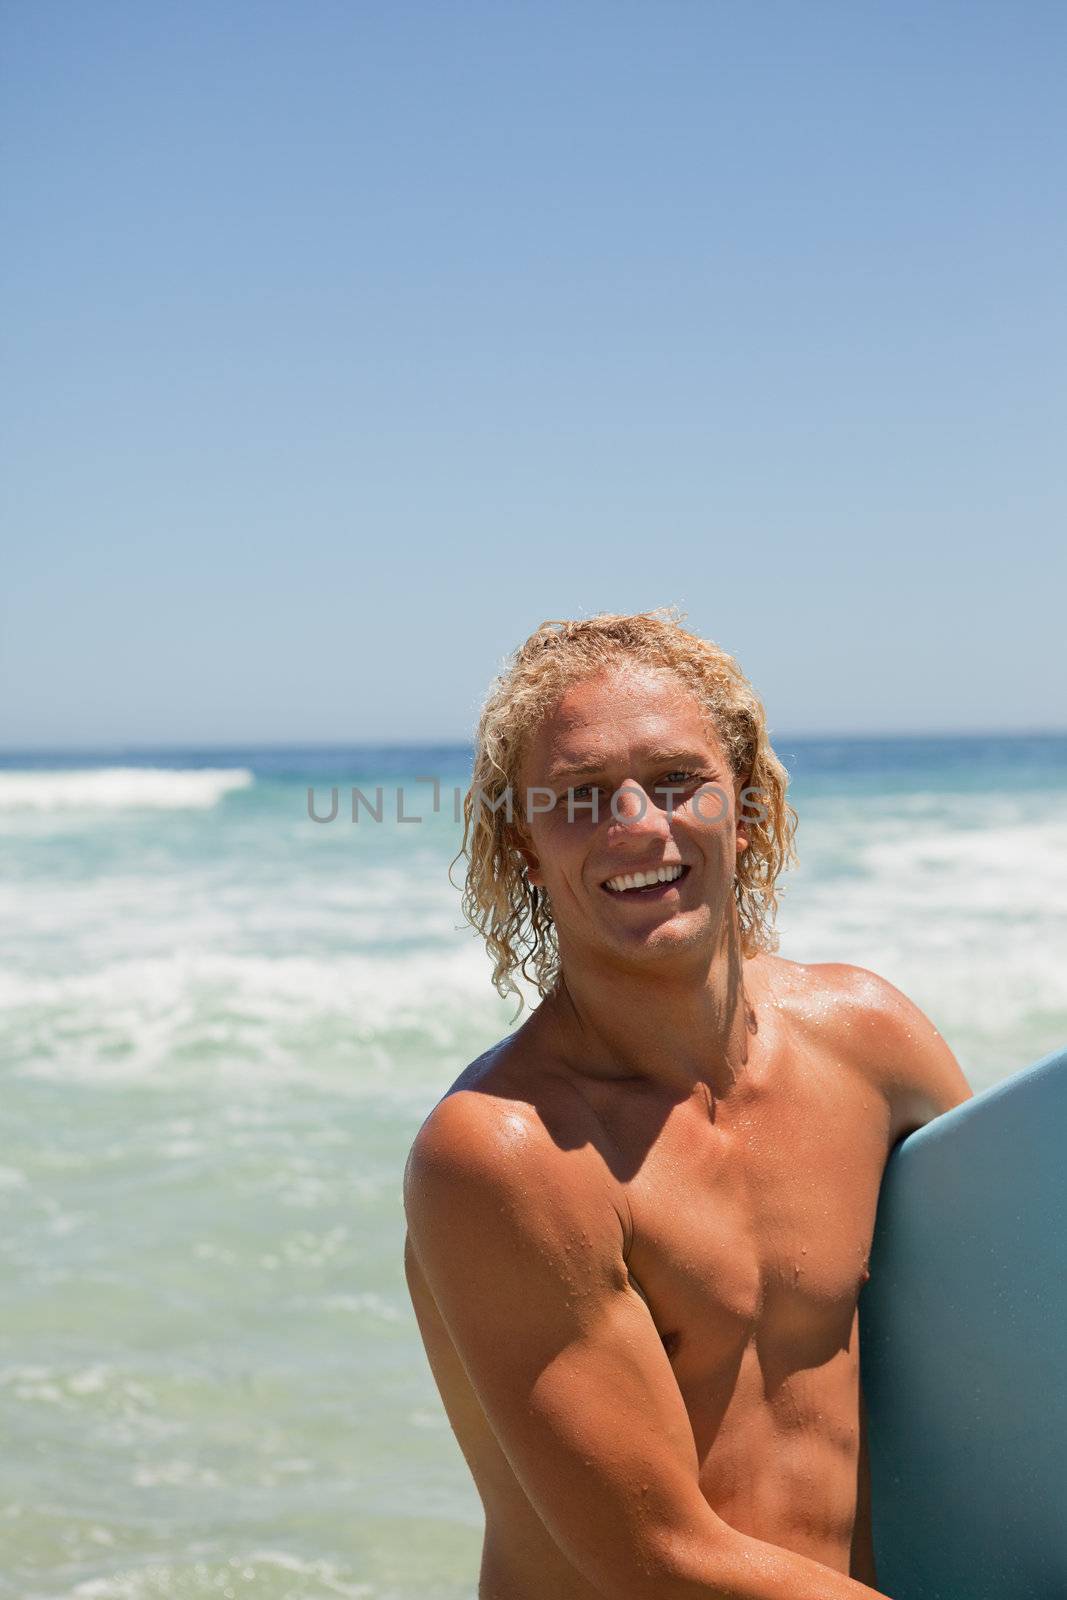 Young blonde man looking at the camera while smiling and holding his surfboard